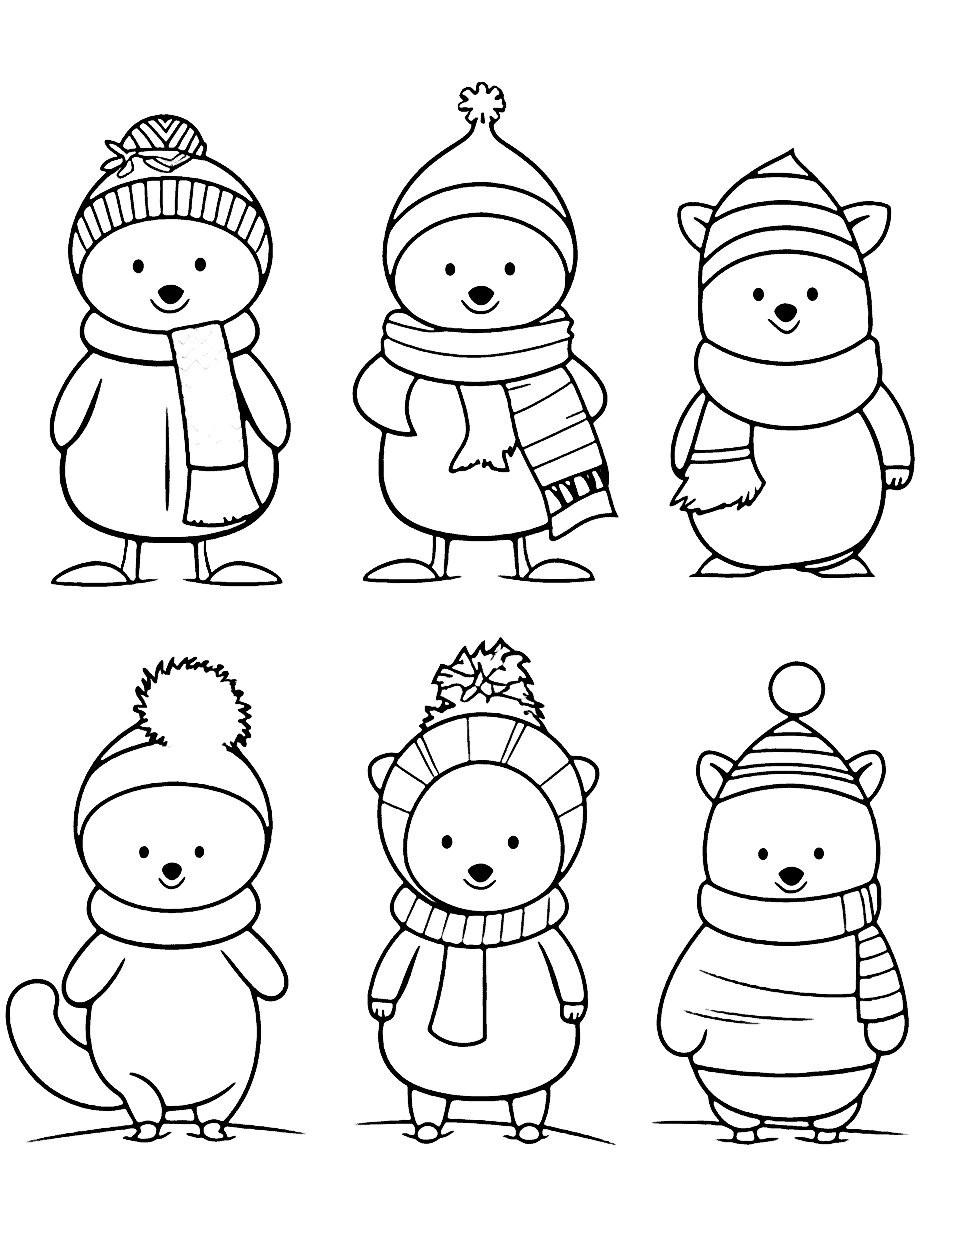 Pre K Winter Animals Coloring Page - Basic outlines of animals in winter gear, perfect for Pre-K kids.